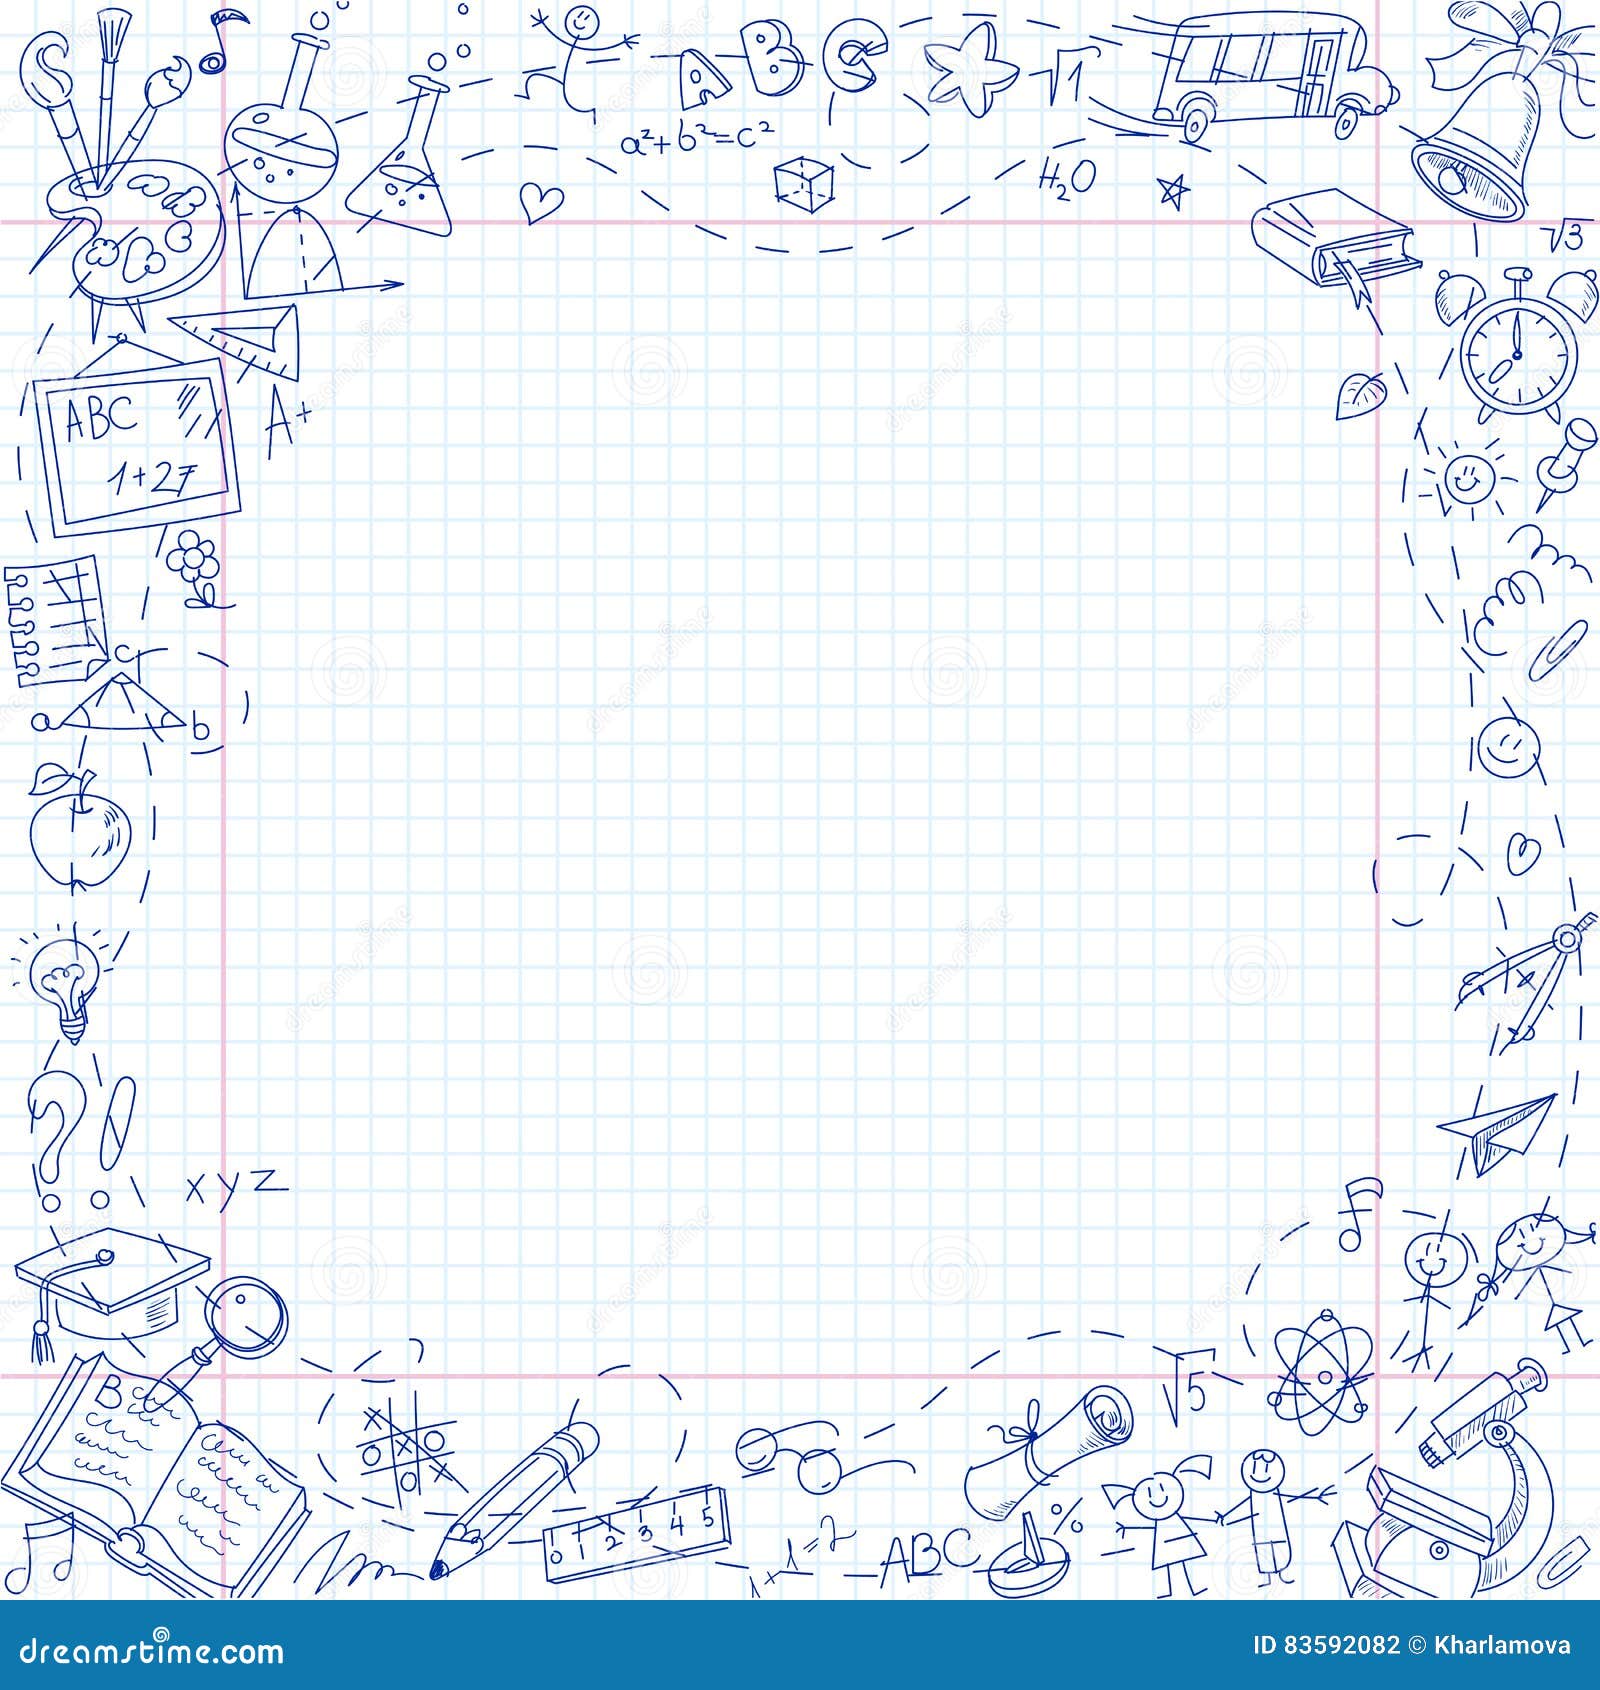 freehand drawing school stationery items on sheet of exercise book